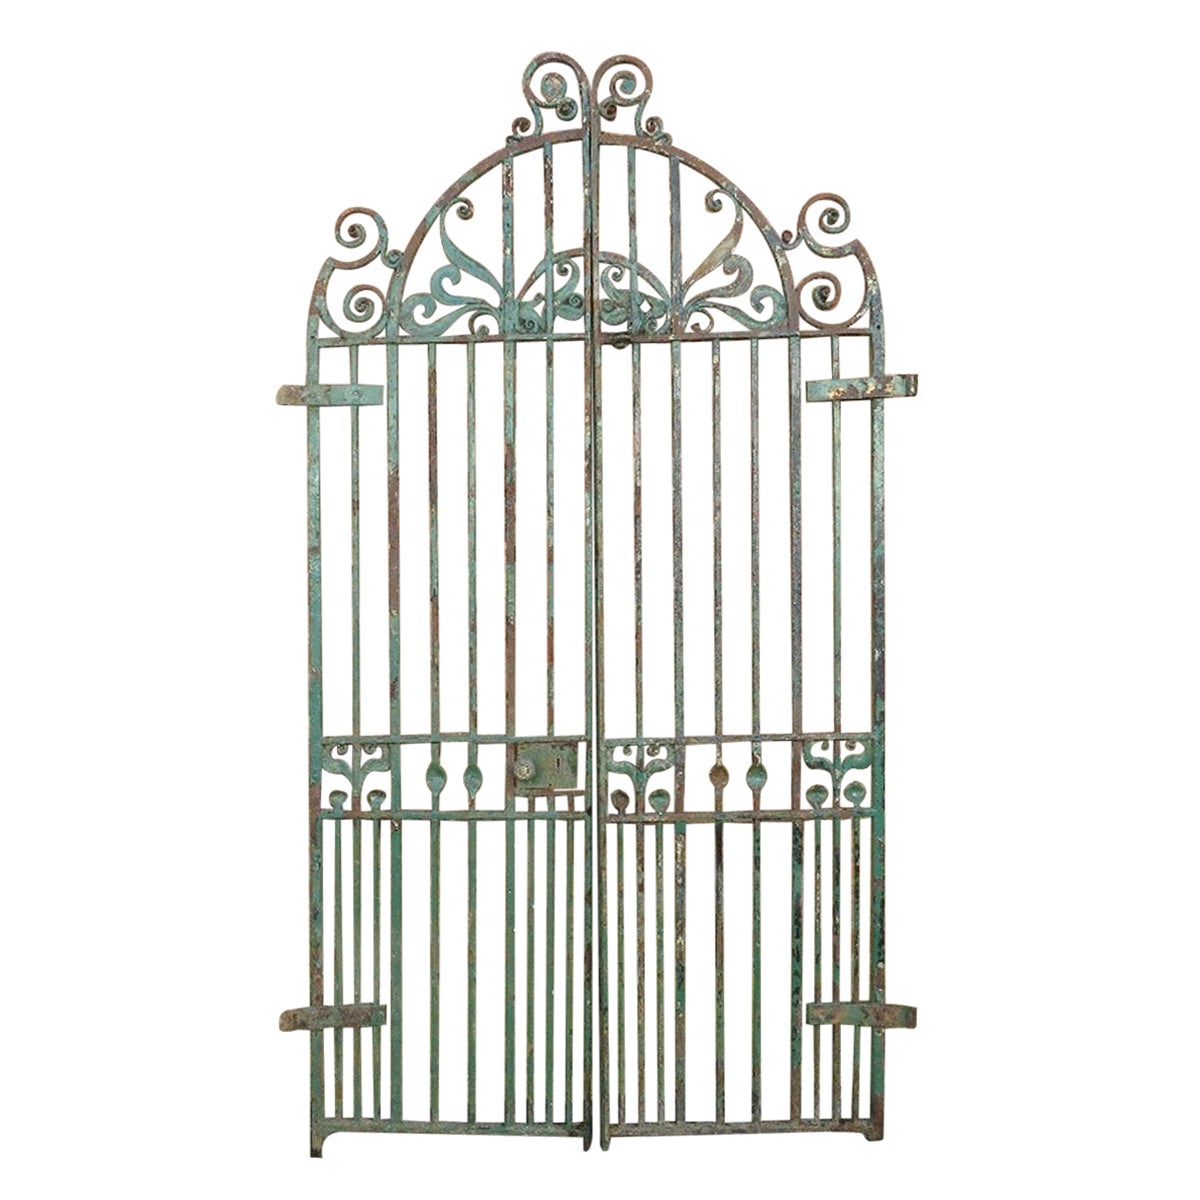 An exceptional period pair of Arts & Crafts hand hammered & wrought iron gates